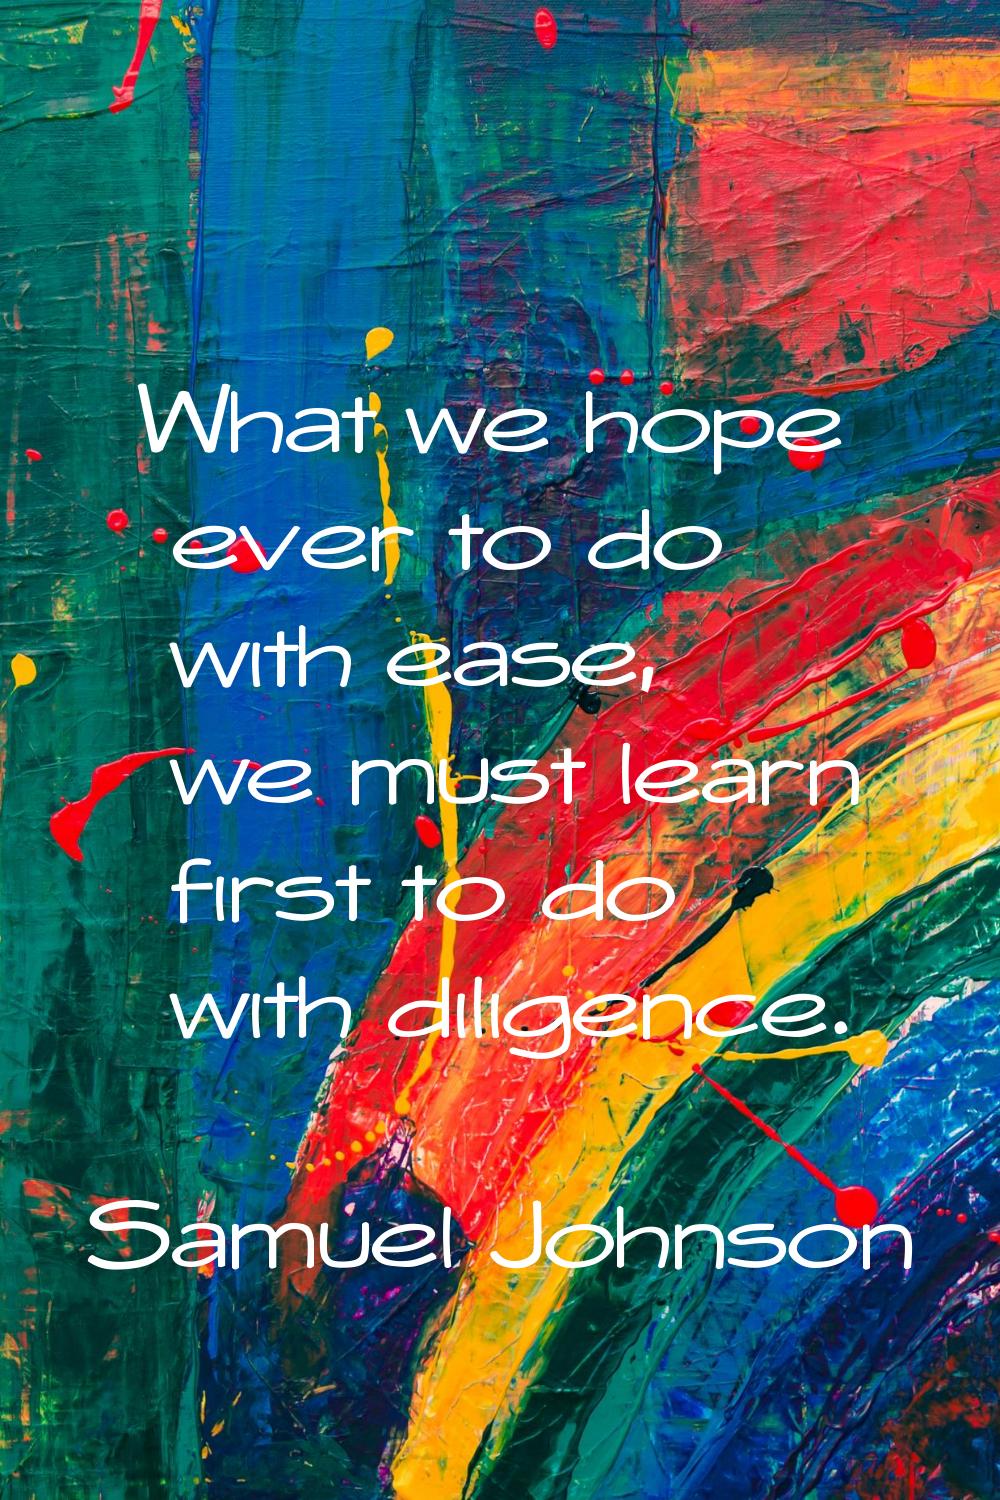 What we hope ever to do with ease, we must learn first to do with diligence.